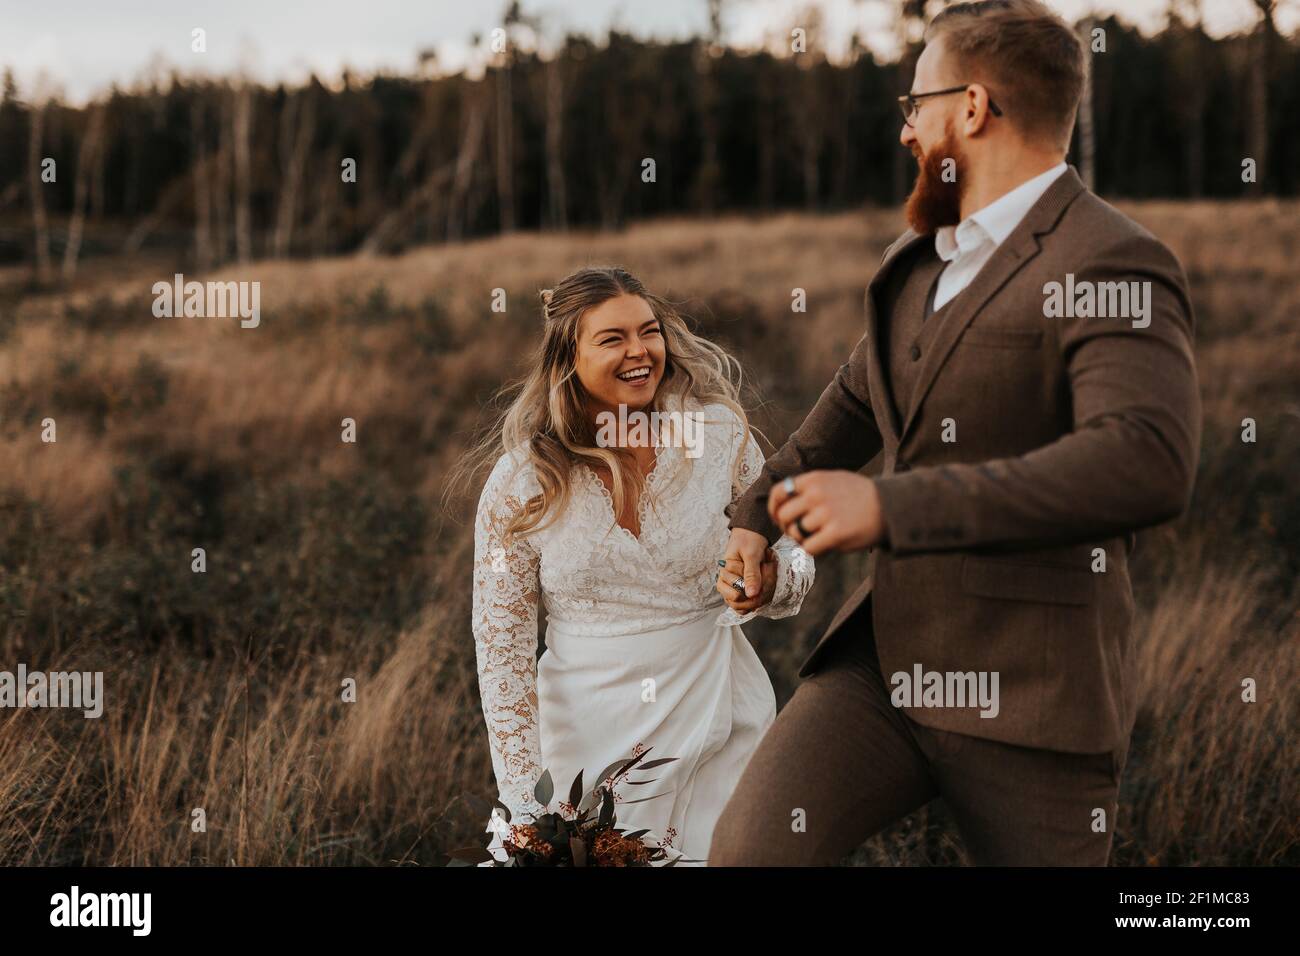 Happy bride and groom together Stock Photo